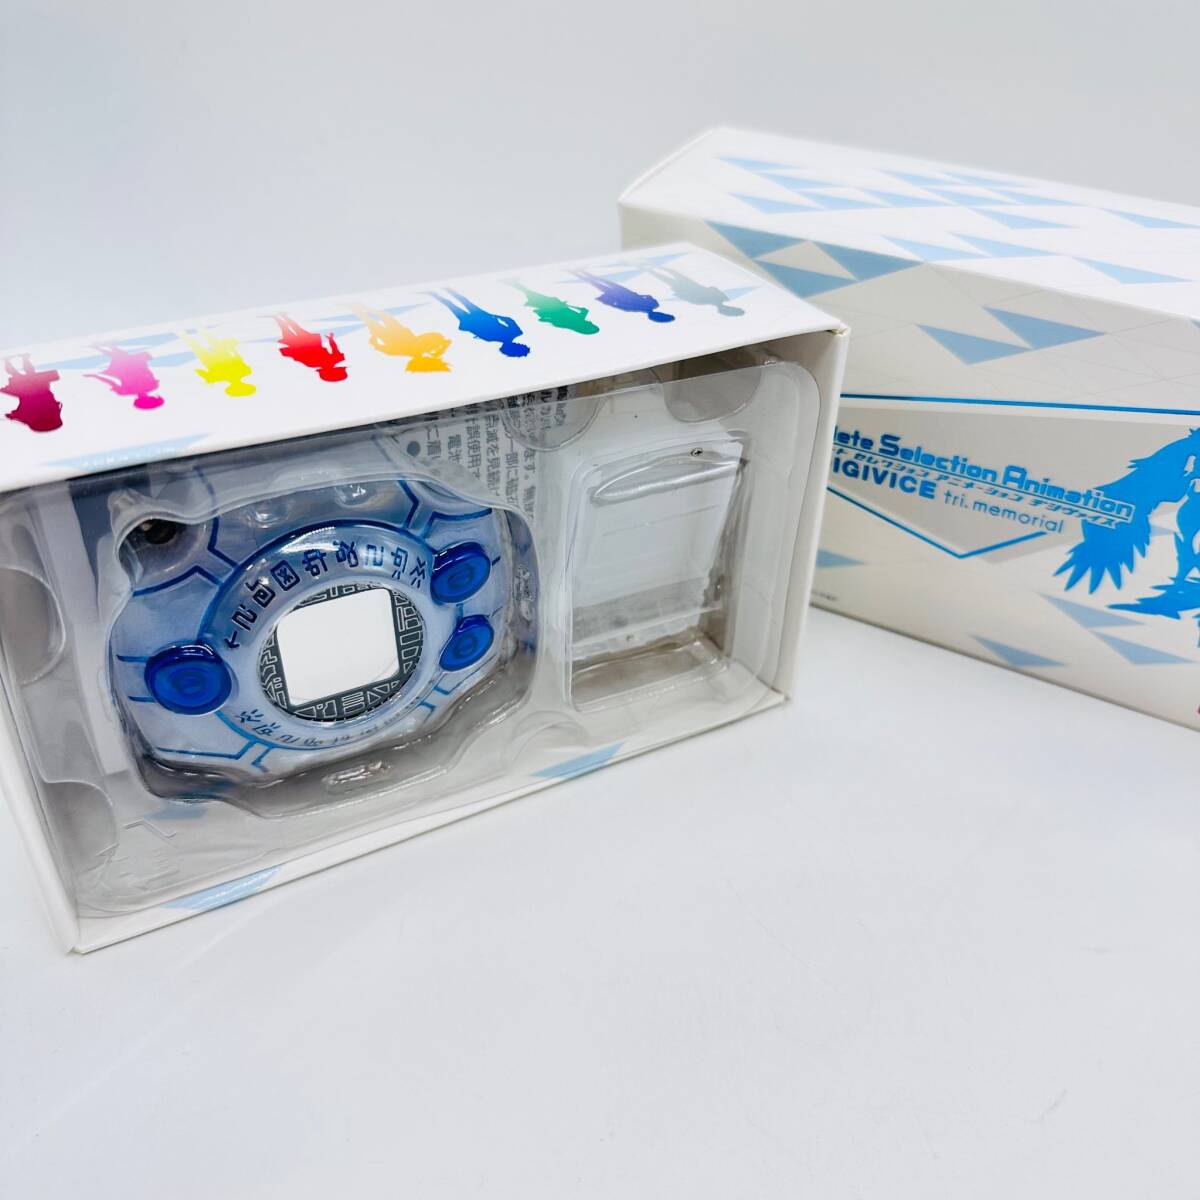  digimon adventure Complete selection animation tejiva chair Bandai higashi . animation unused goods box equipped 1 jpy exhibition 